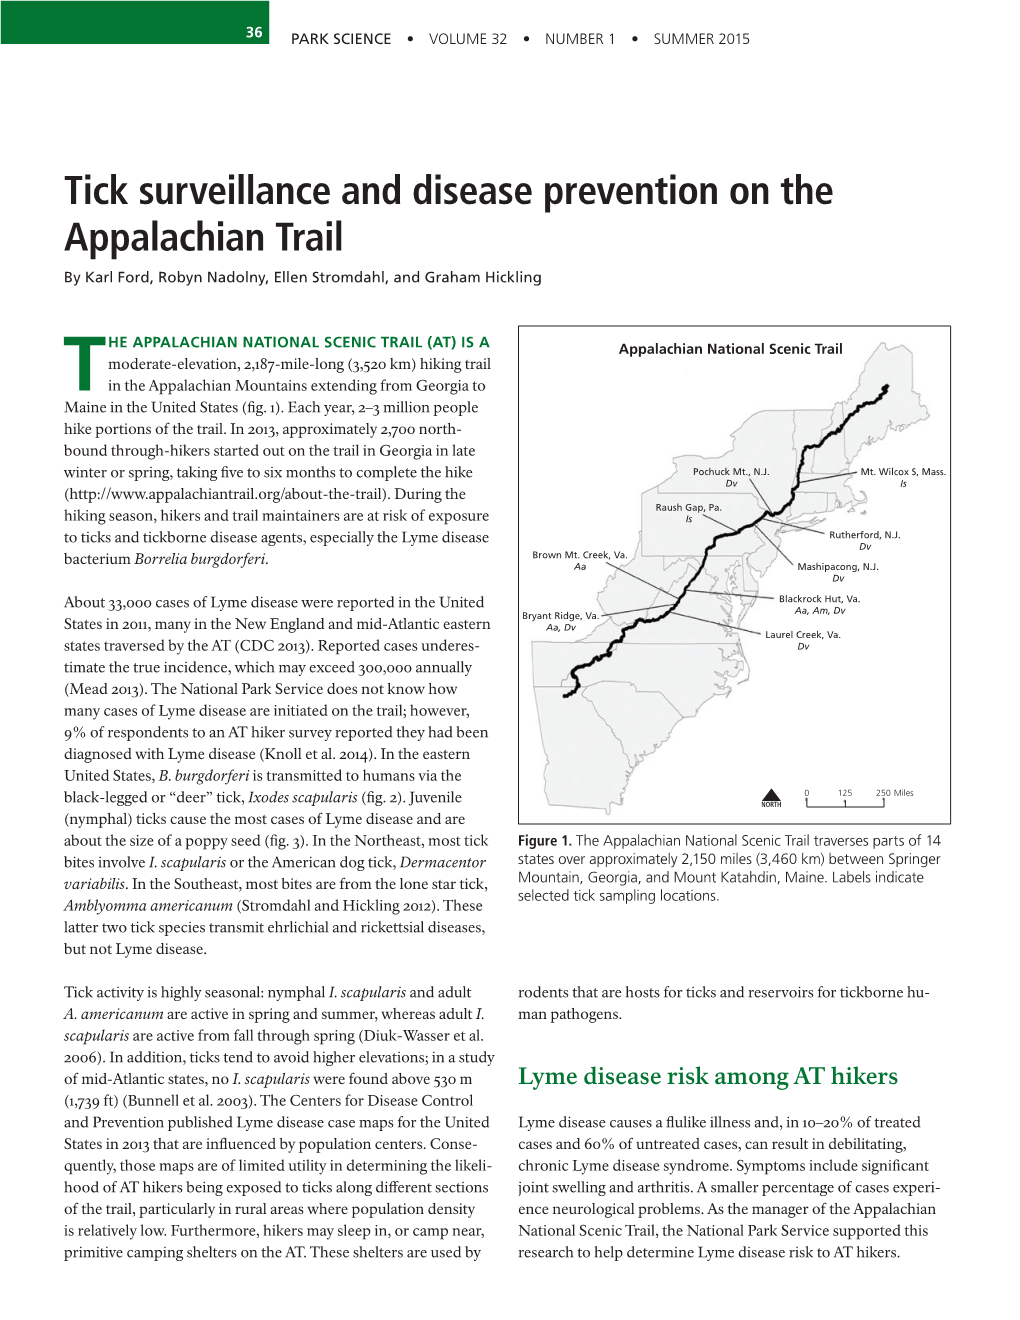 Tick Surveillance and Disease Prevention on the Appalachian Trail by Karl Ford, Robyn Nadolny, Ellen Stromdahl, and Graham Hickling